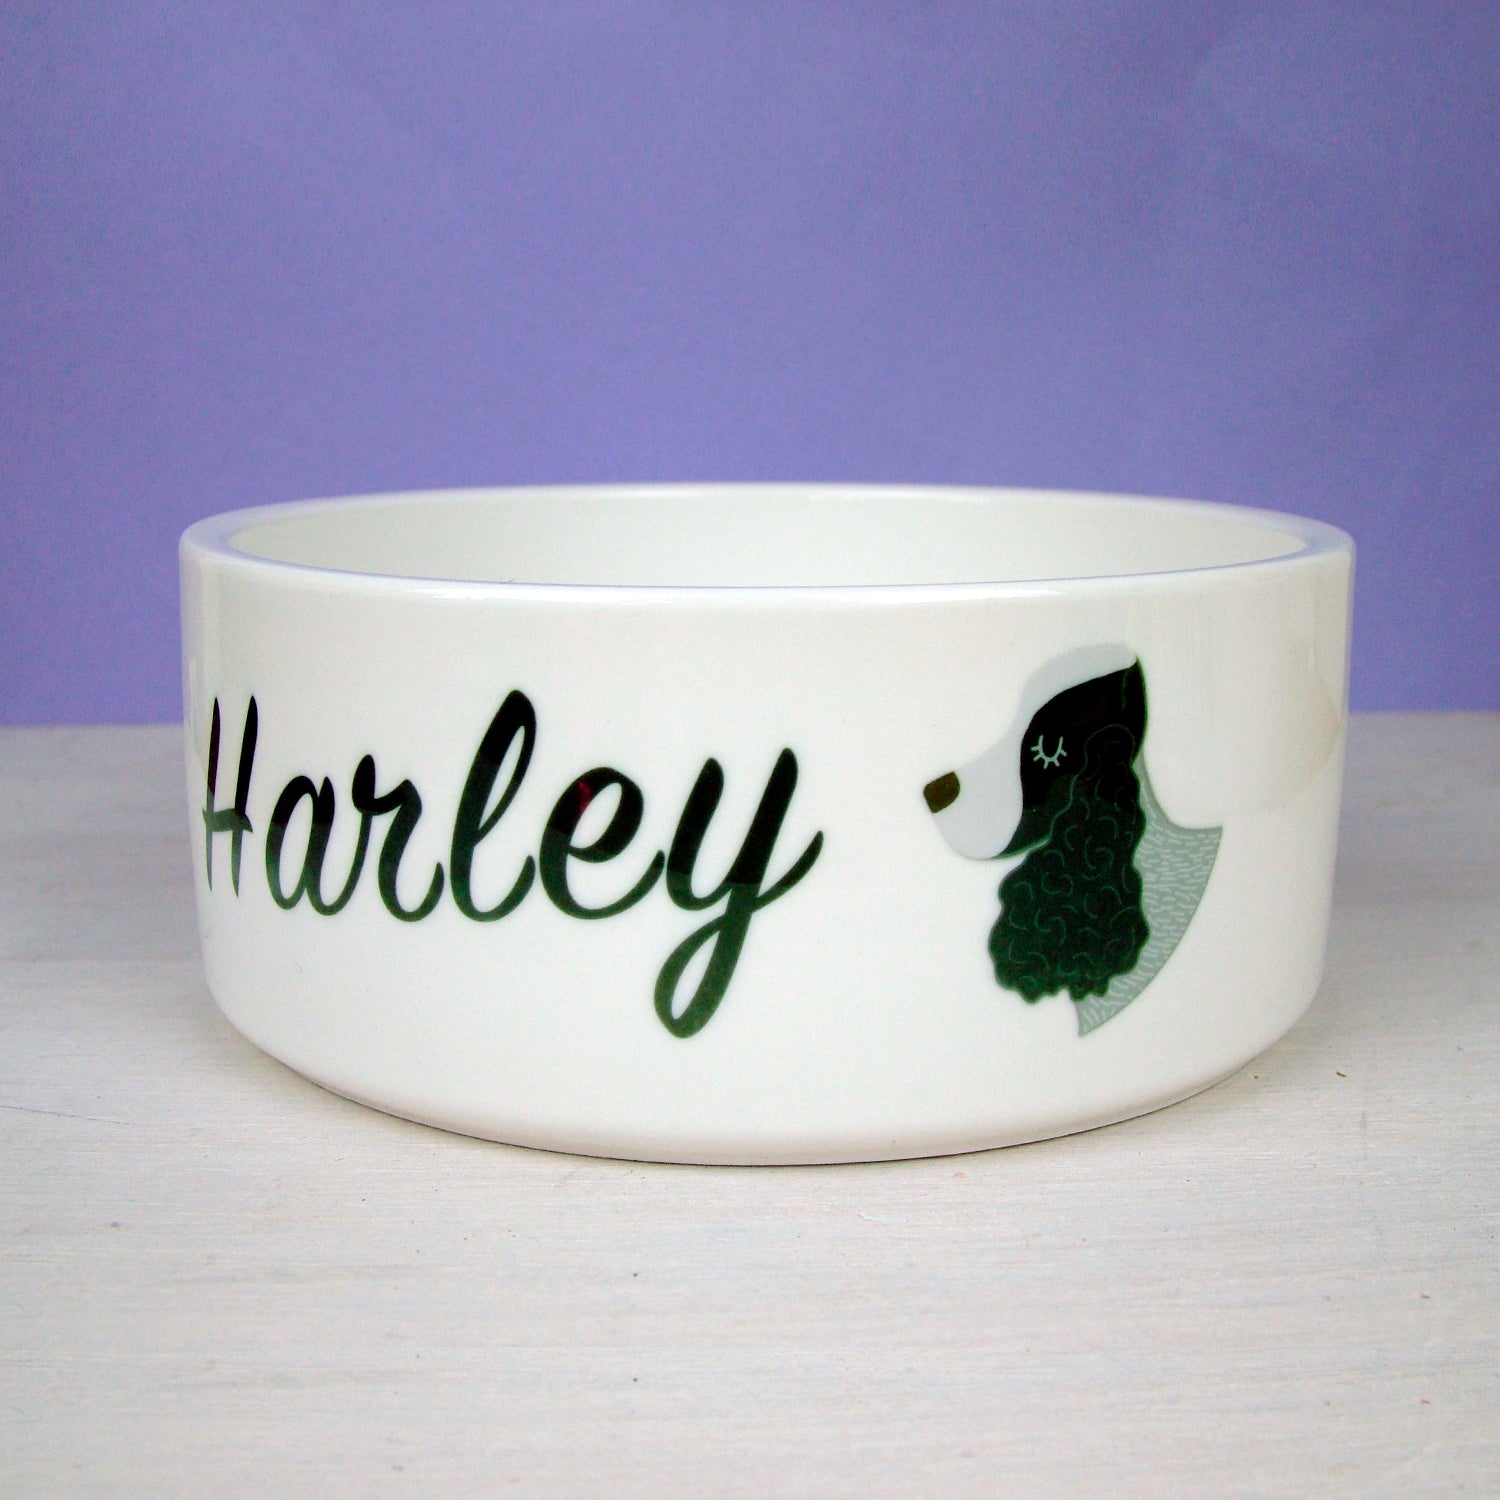 Cocker Spaniel Personalised Ceramic Dog Bowl  - Hoobynoo - Personalised Pet Tags and Gifts